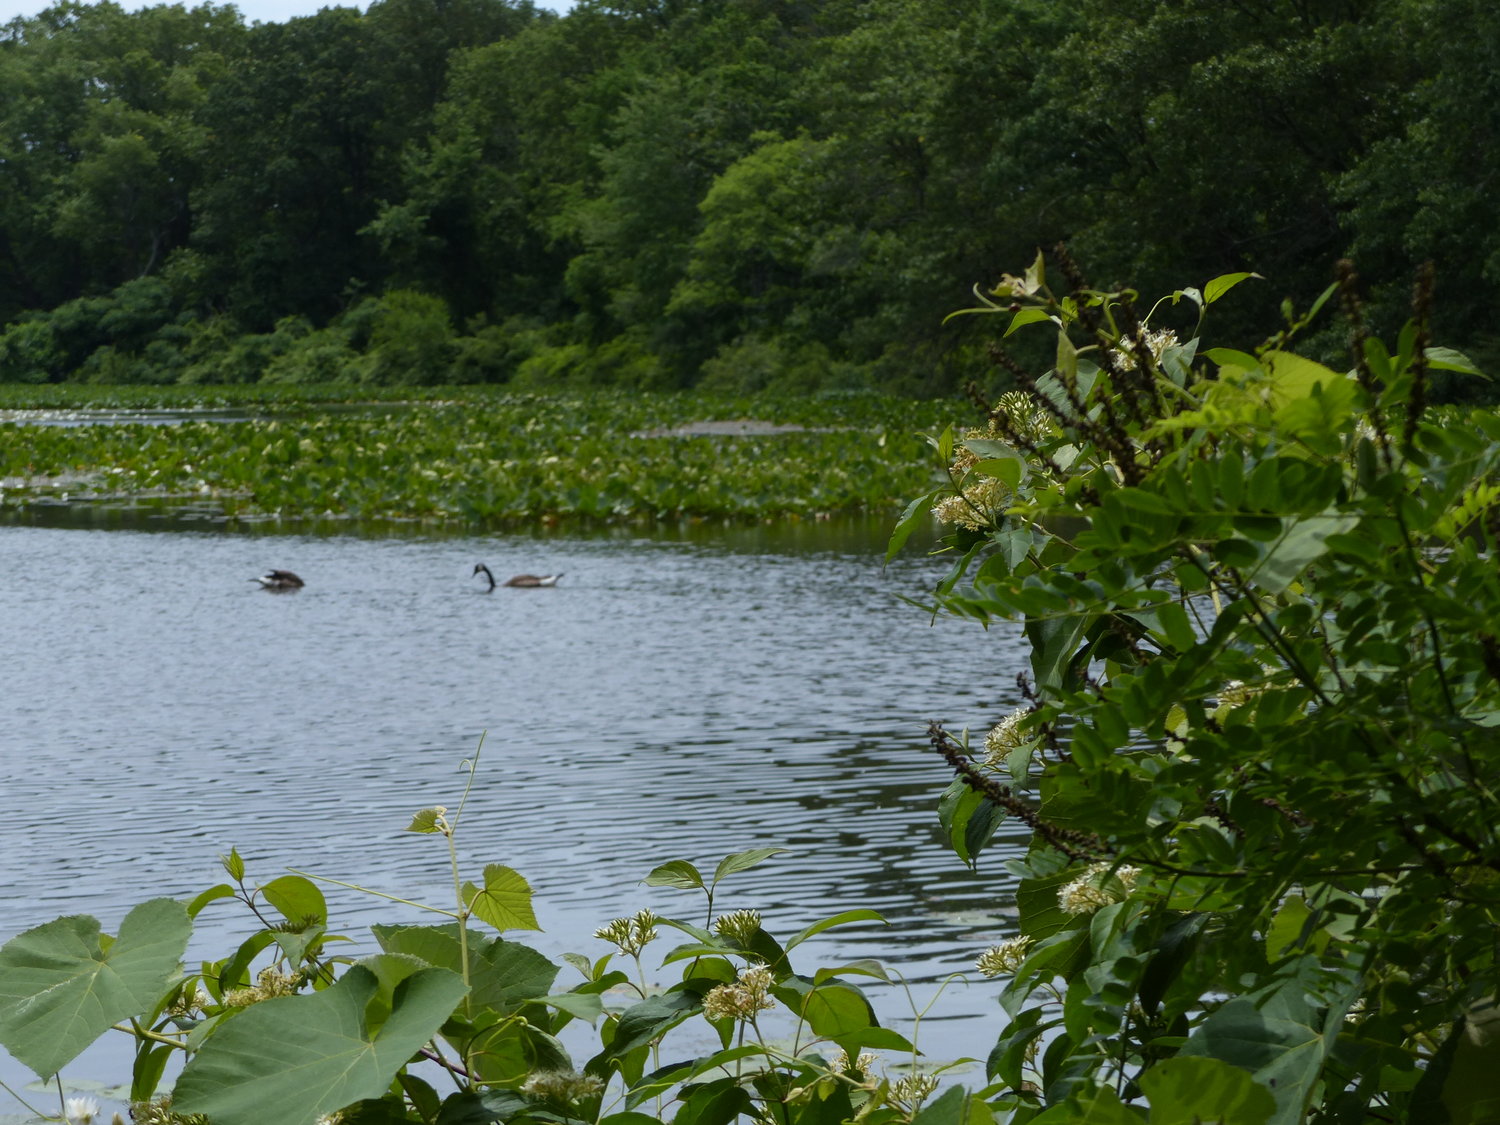 A view of Lower Twin Pond, which has much more vegetation than Upper. Lower Twin Pond flows south towards Mill Pond.